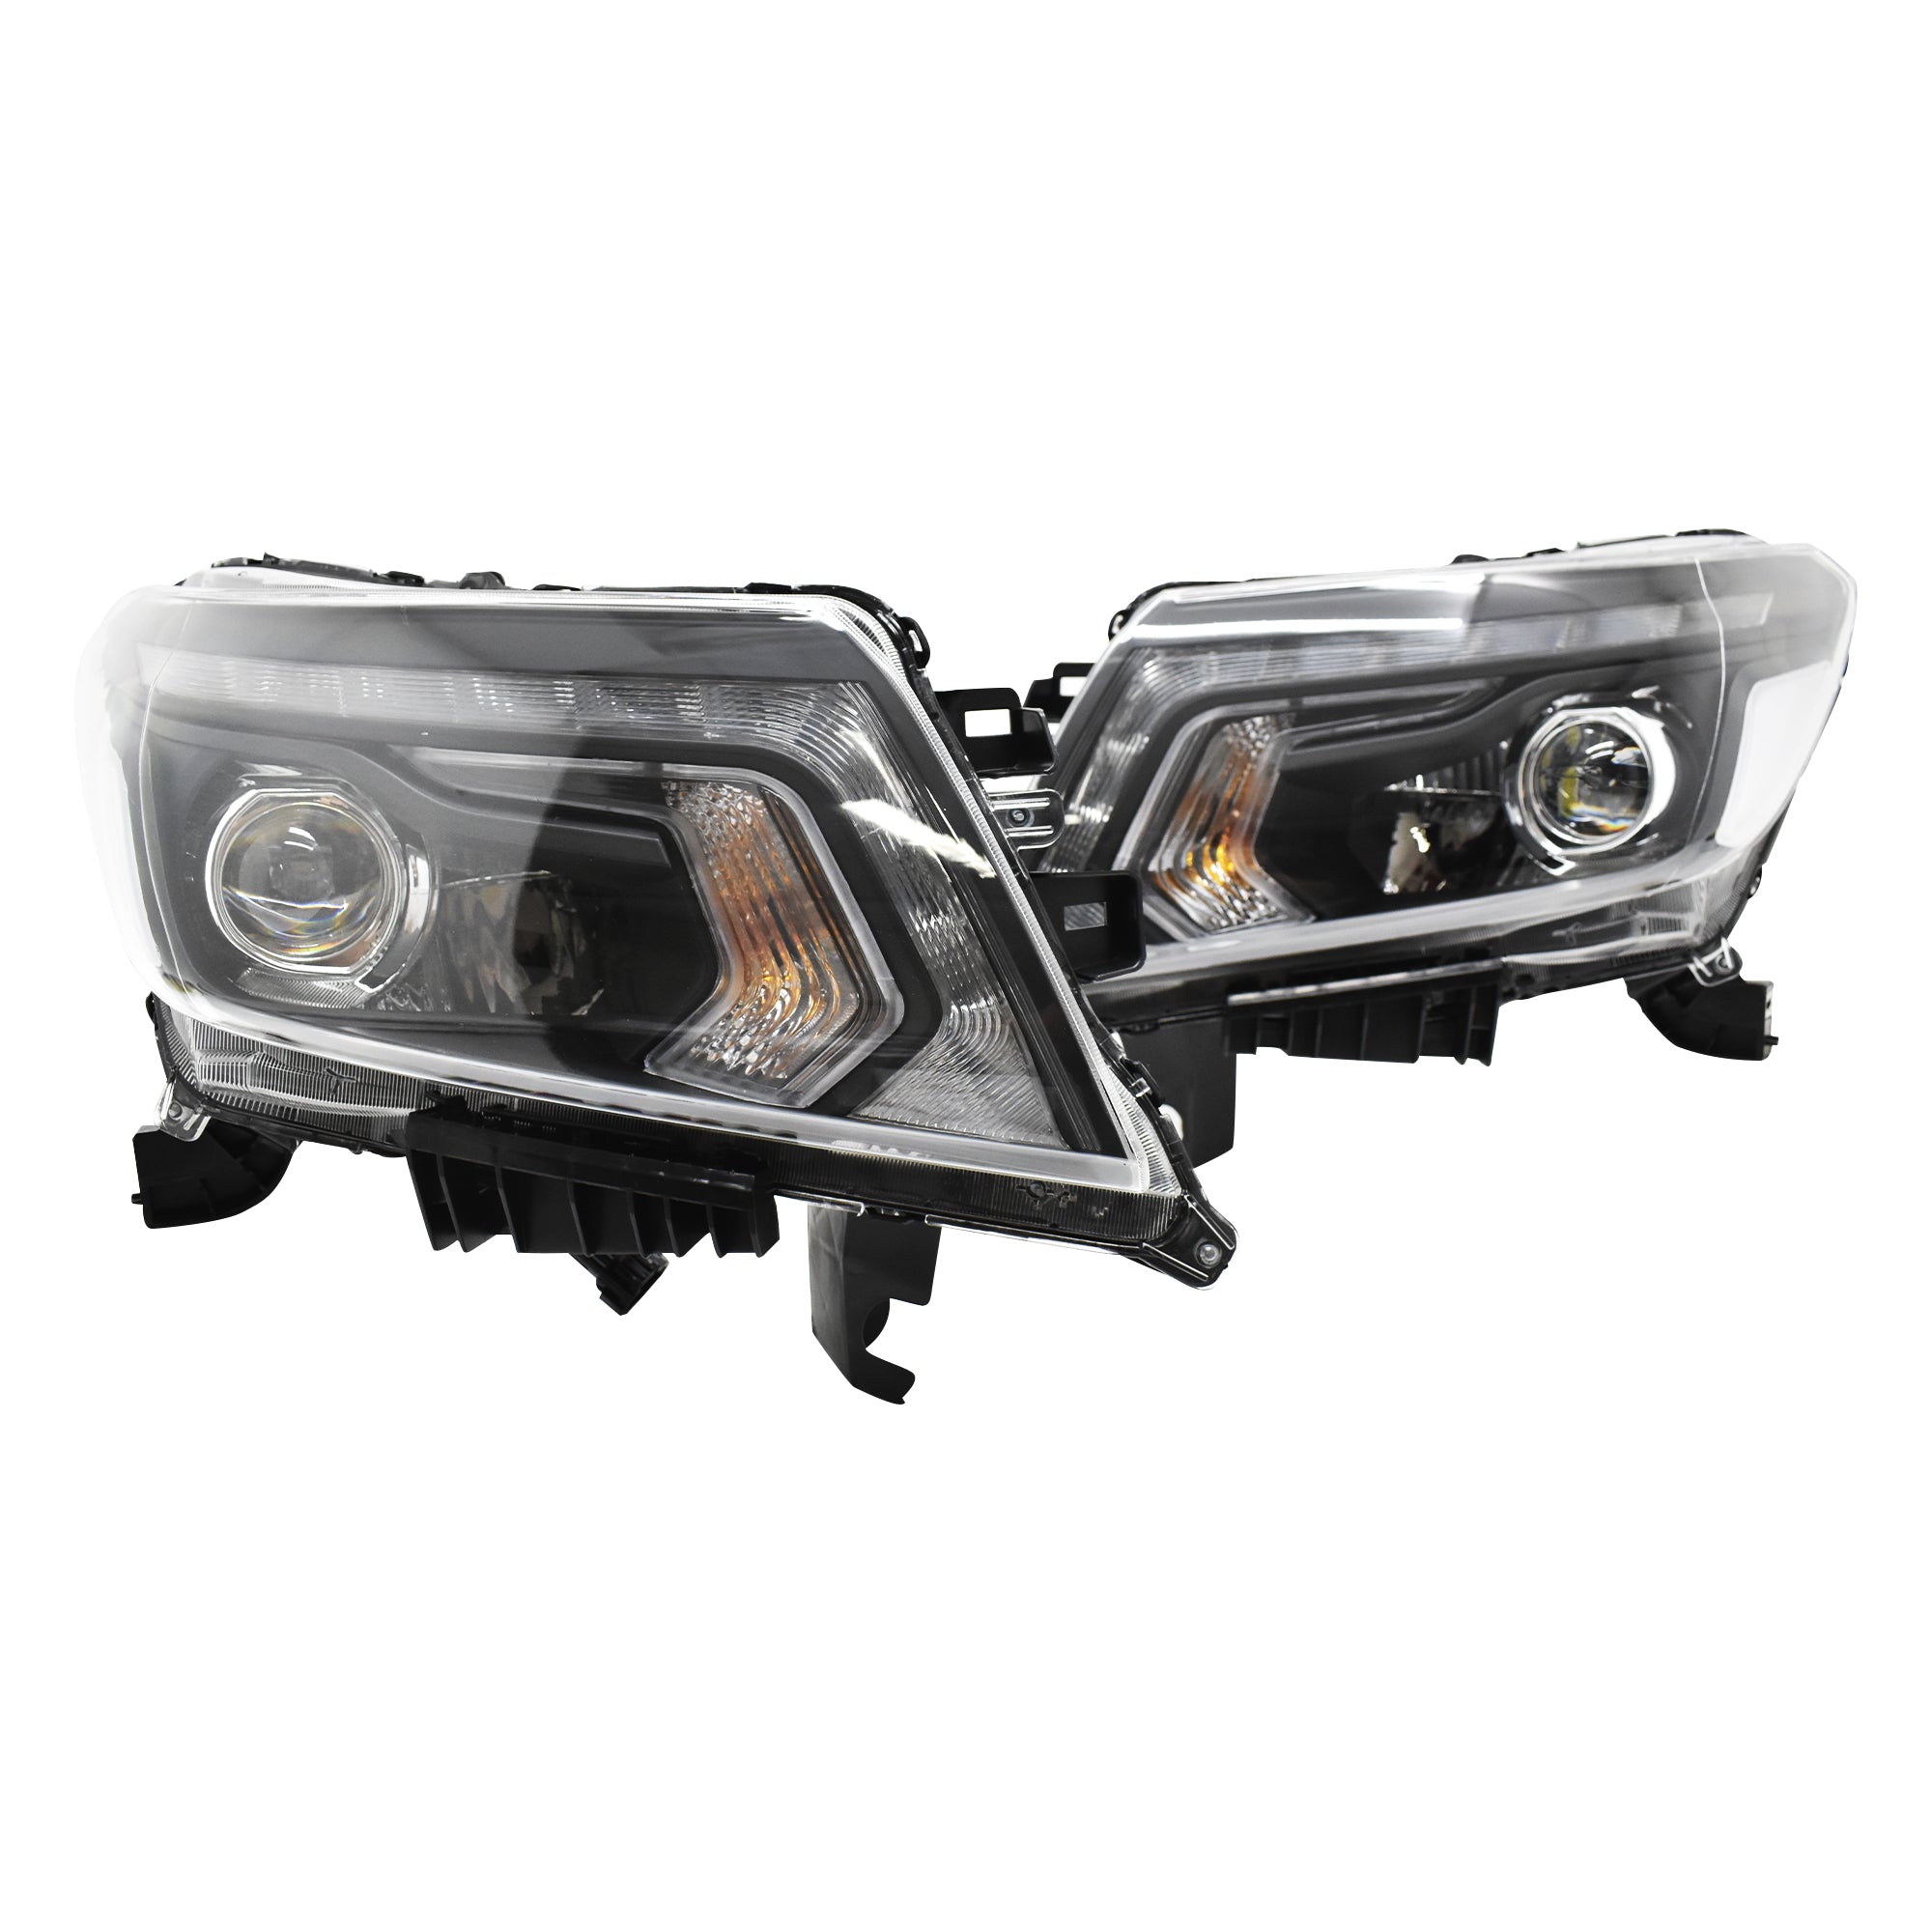 Faros NP300-Frontier 17-18 c/lupa y full led Negros Performance